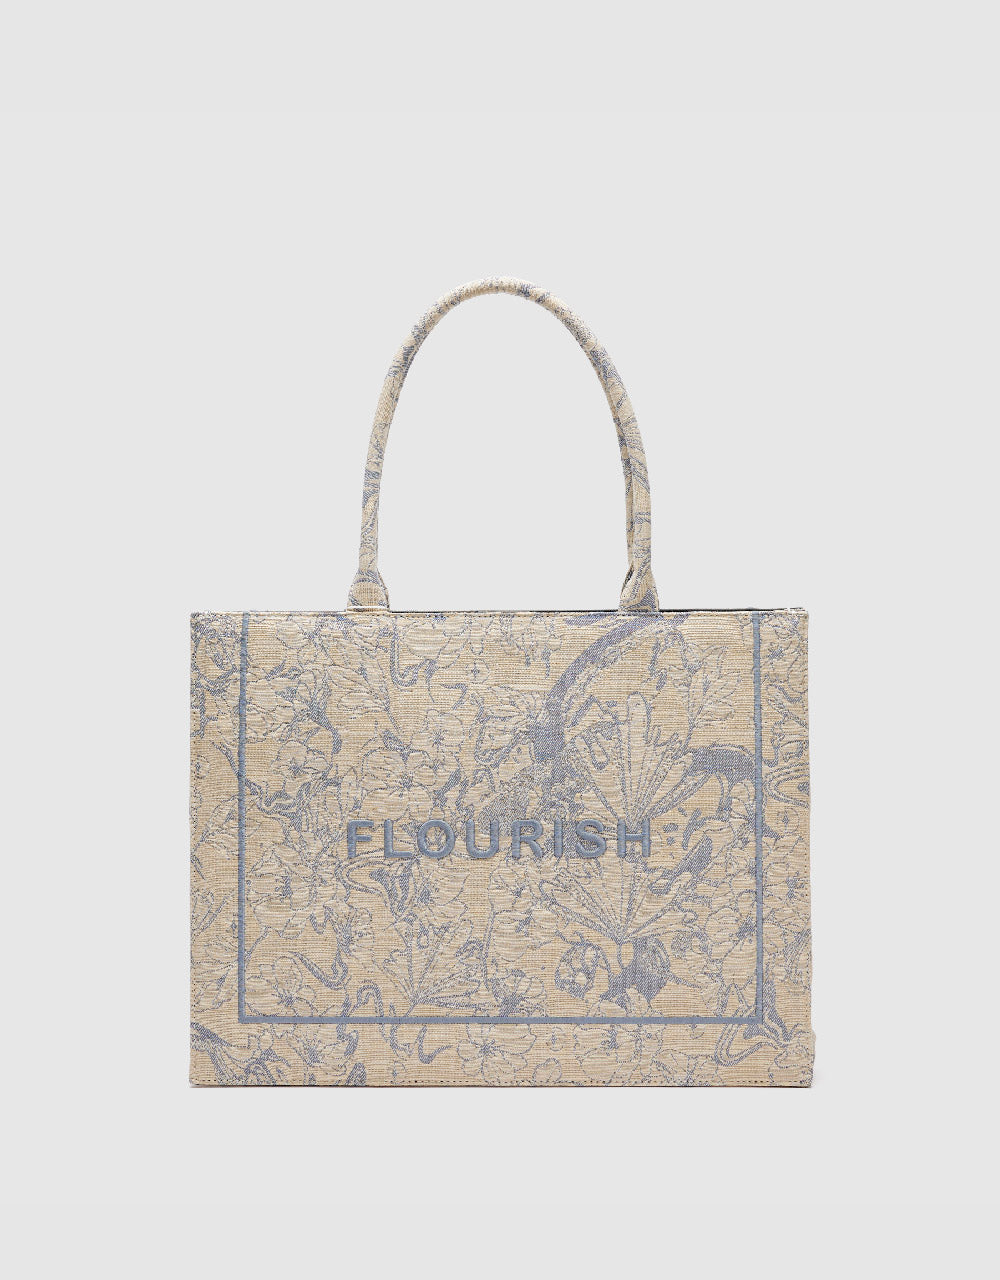 Printed Tote Bag With Stand Handle